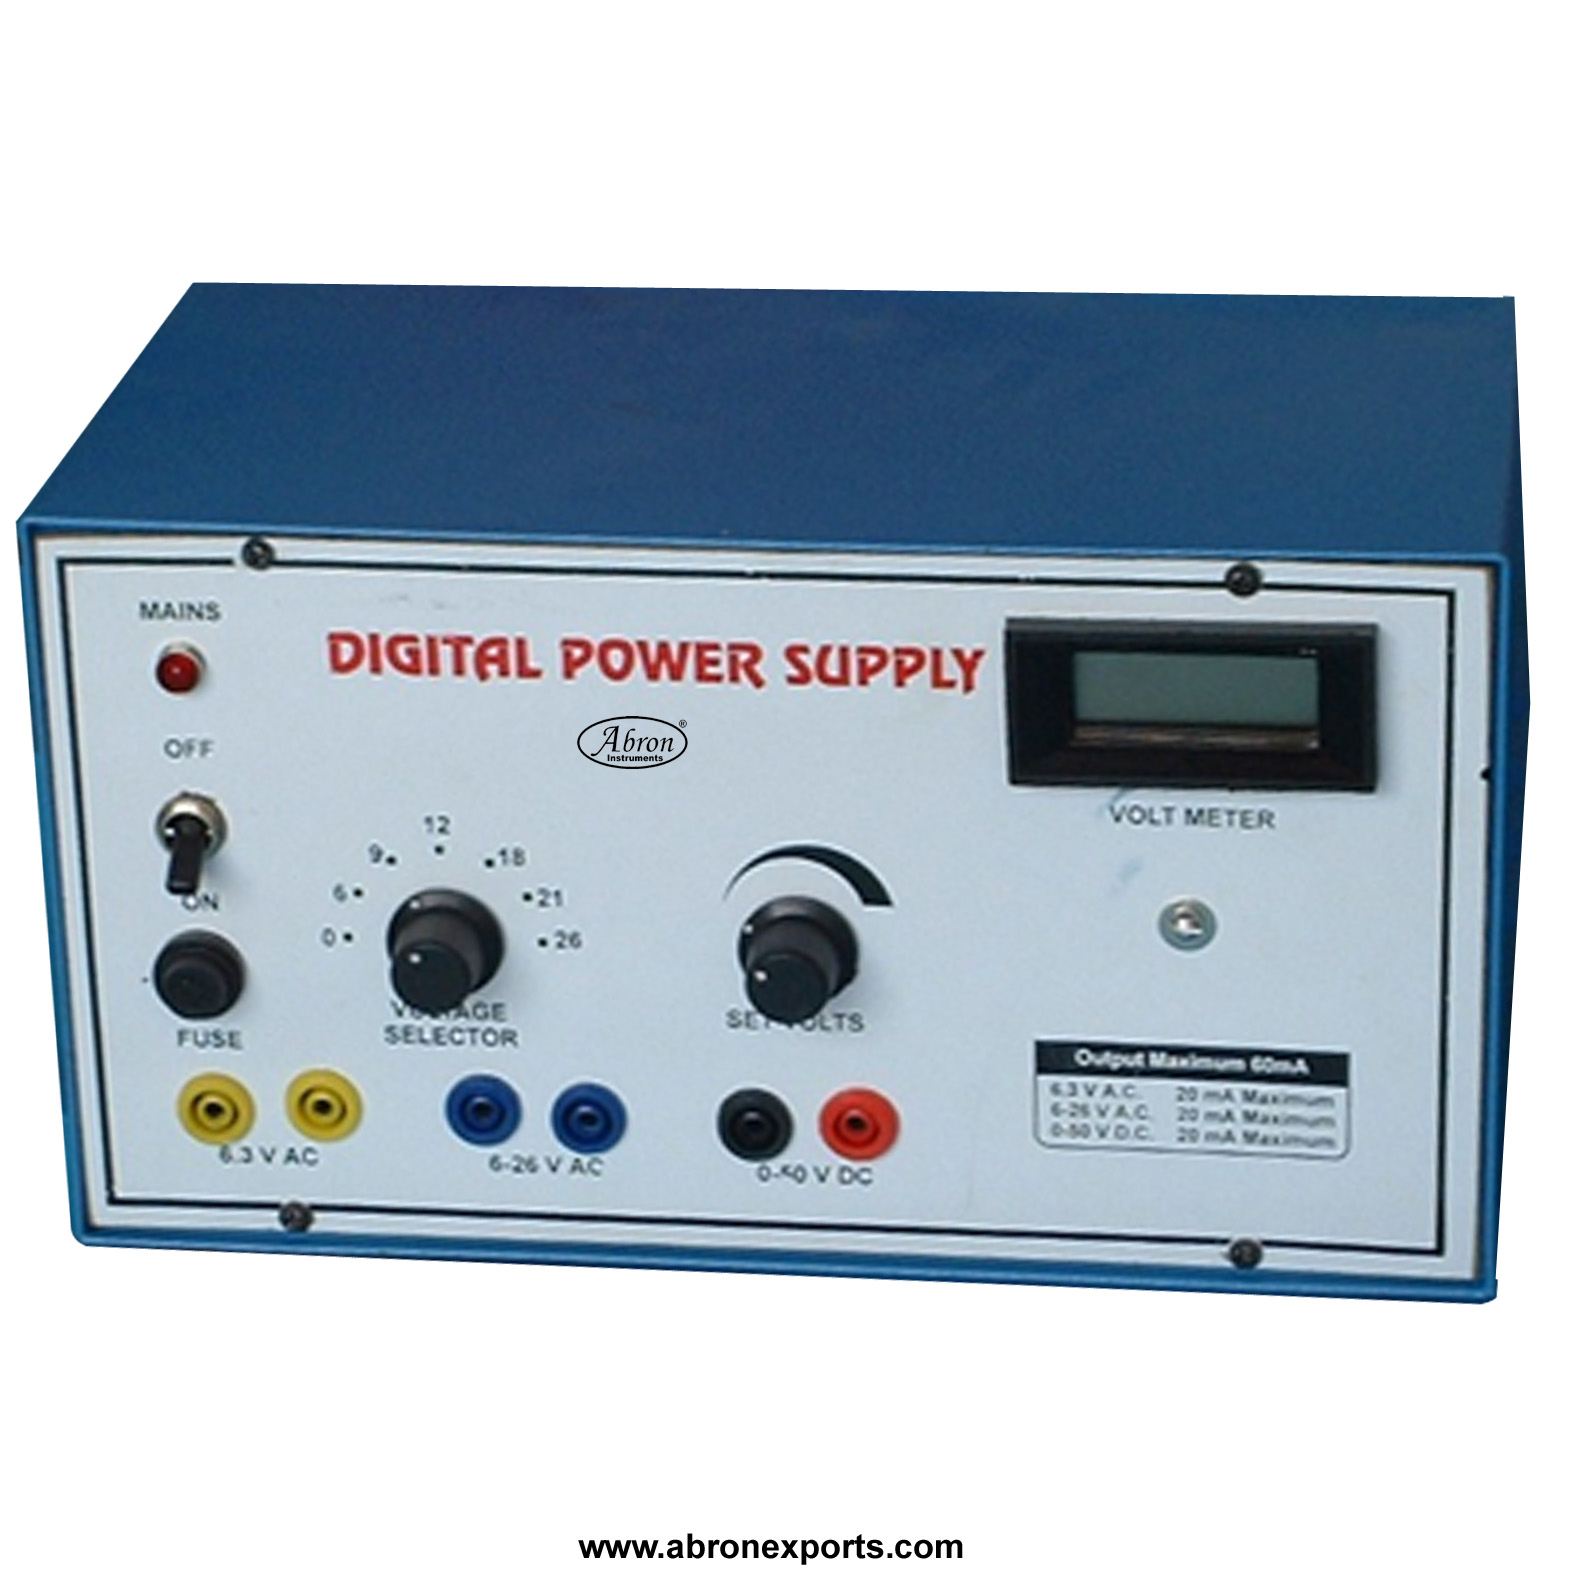 Power Supply Stabilized 1 Digital LCD meters LT 6.3V Fixed HT 0-40V DC Bias 0-25V DC Selectable by knob-switch with sockets AE-1375DL	